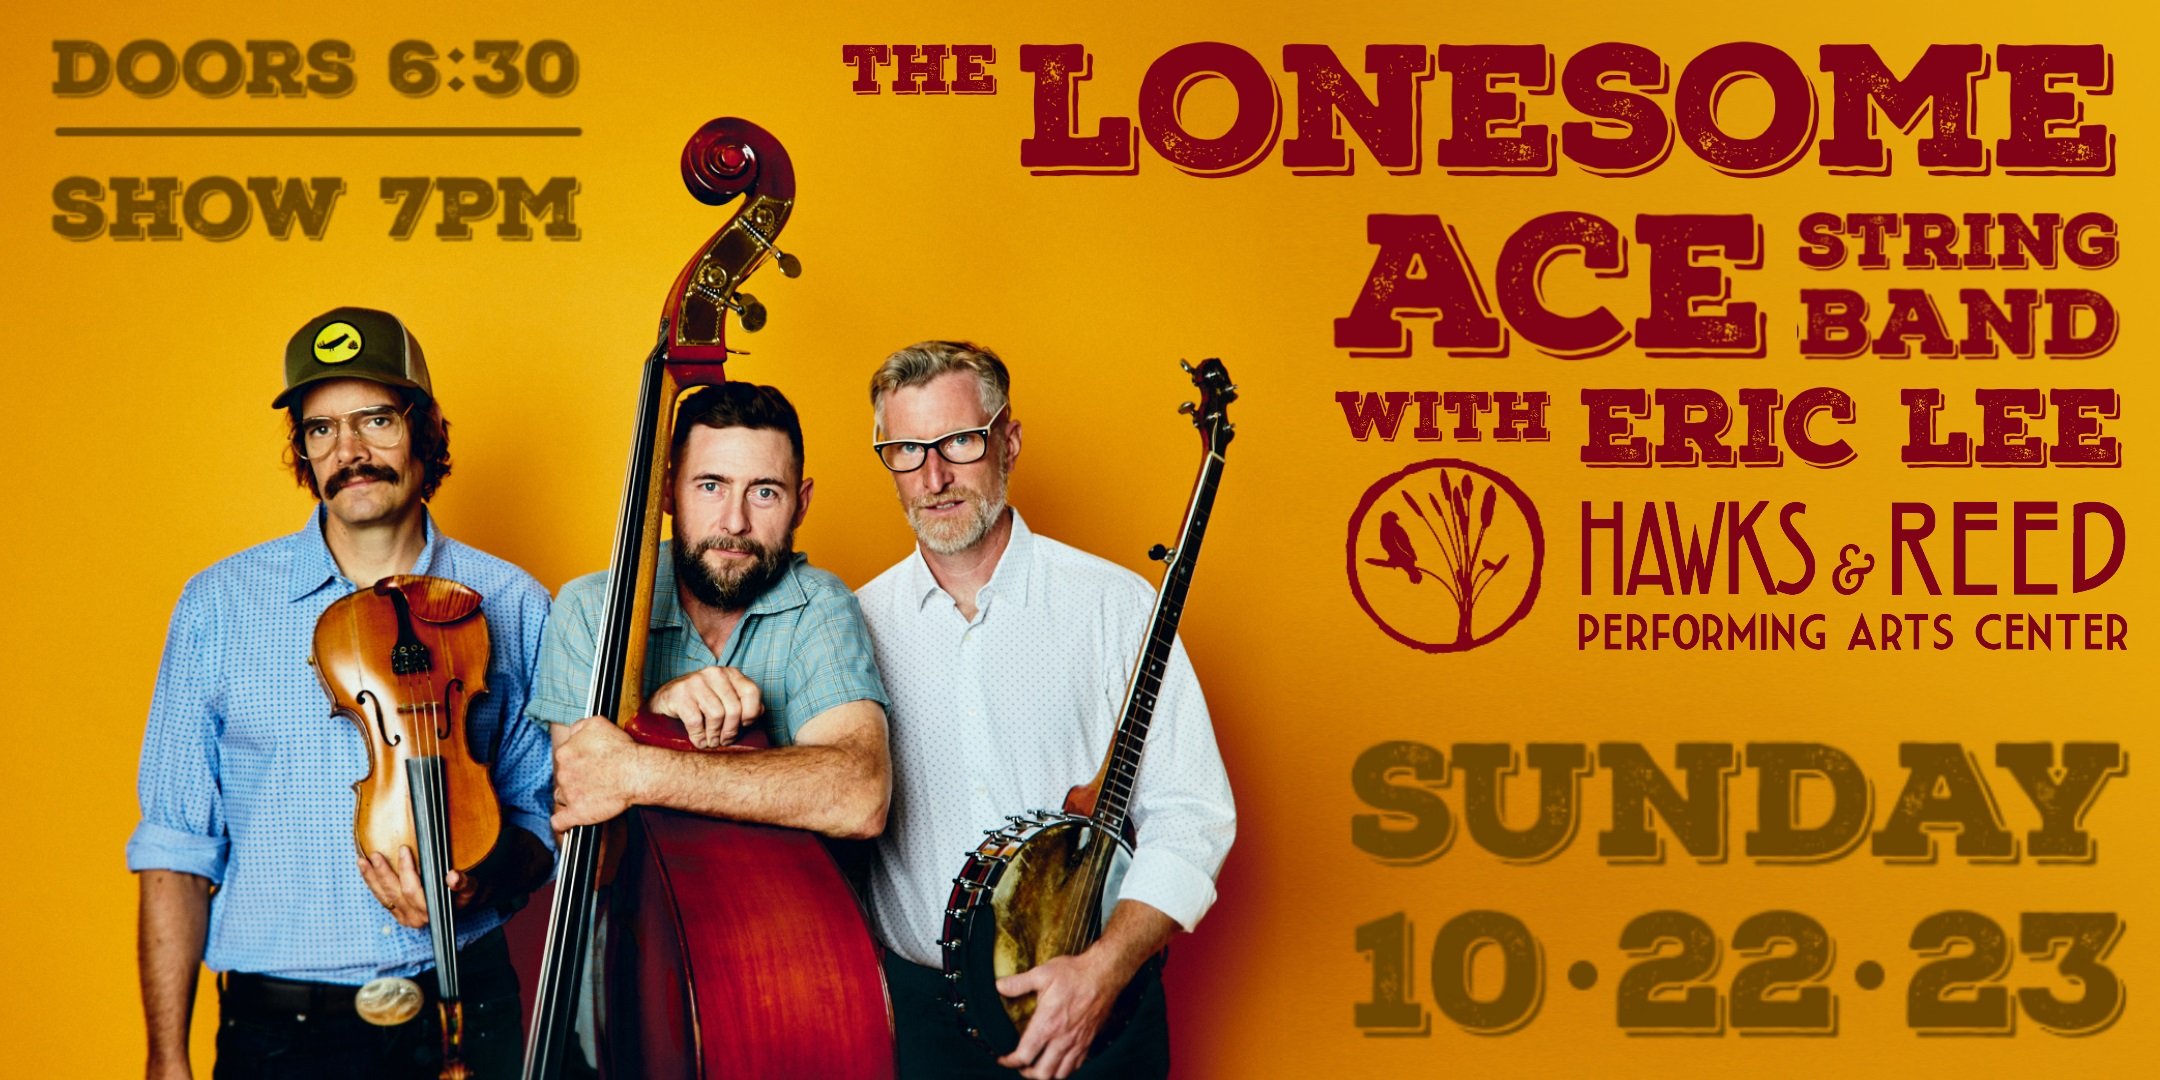 The Lonesome Ace String Band with Eric Lee